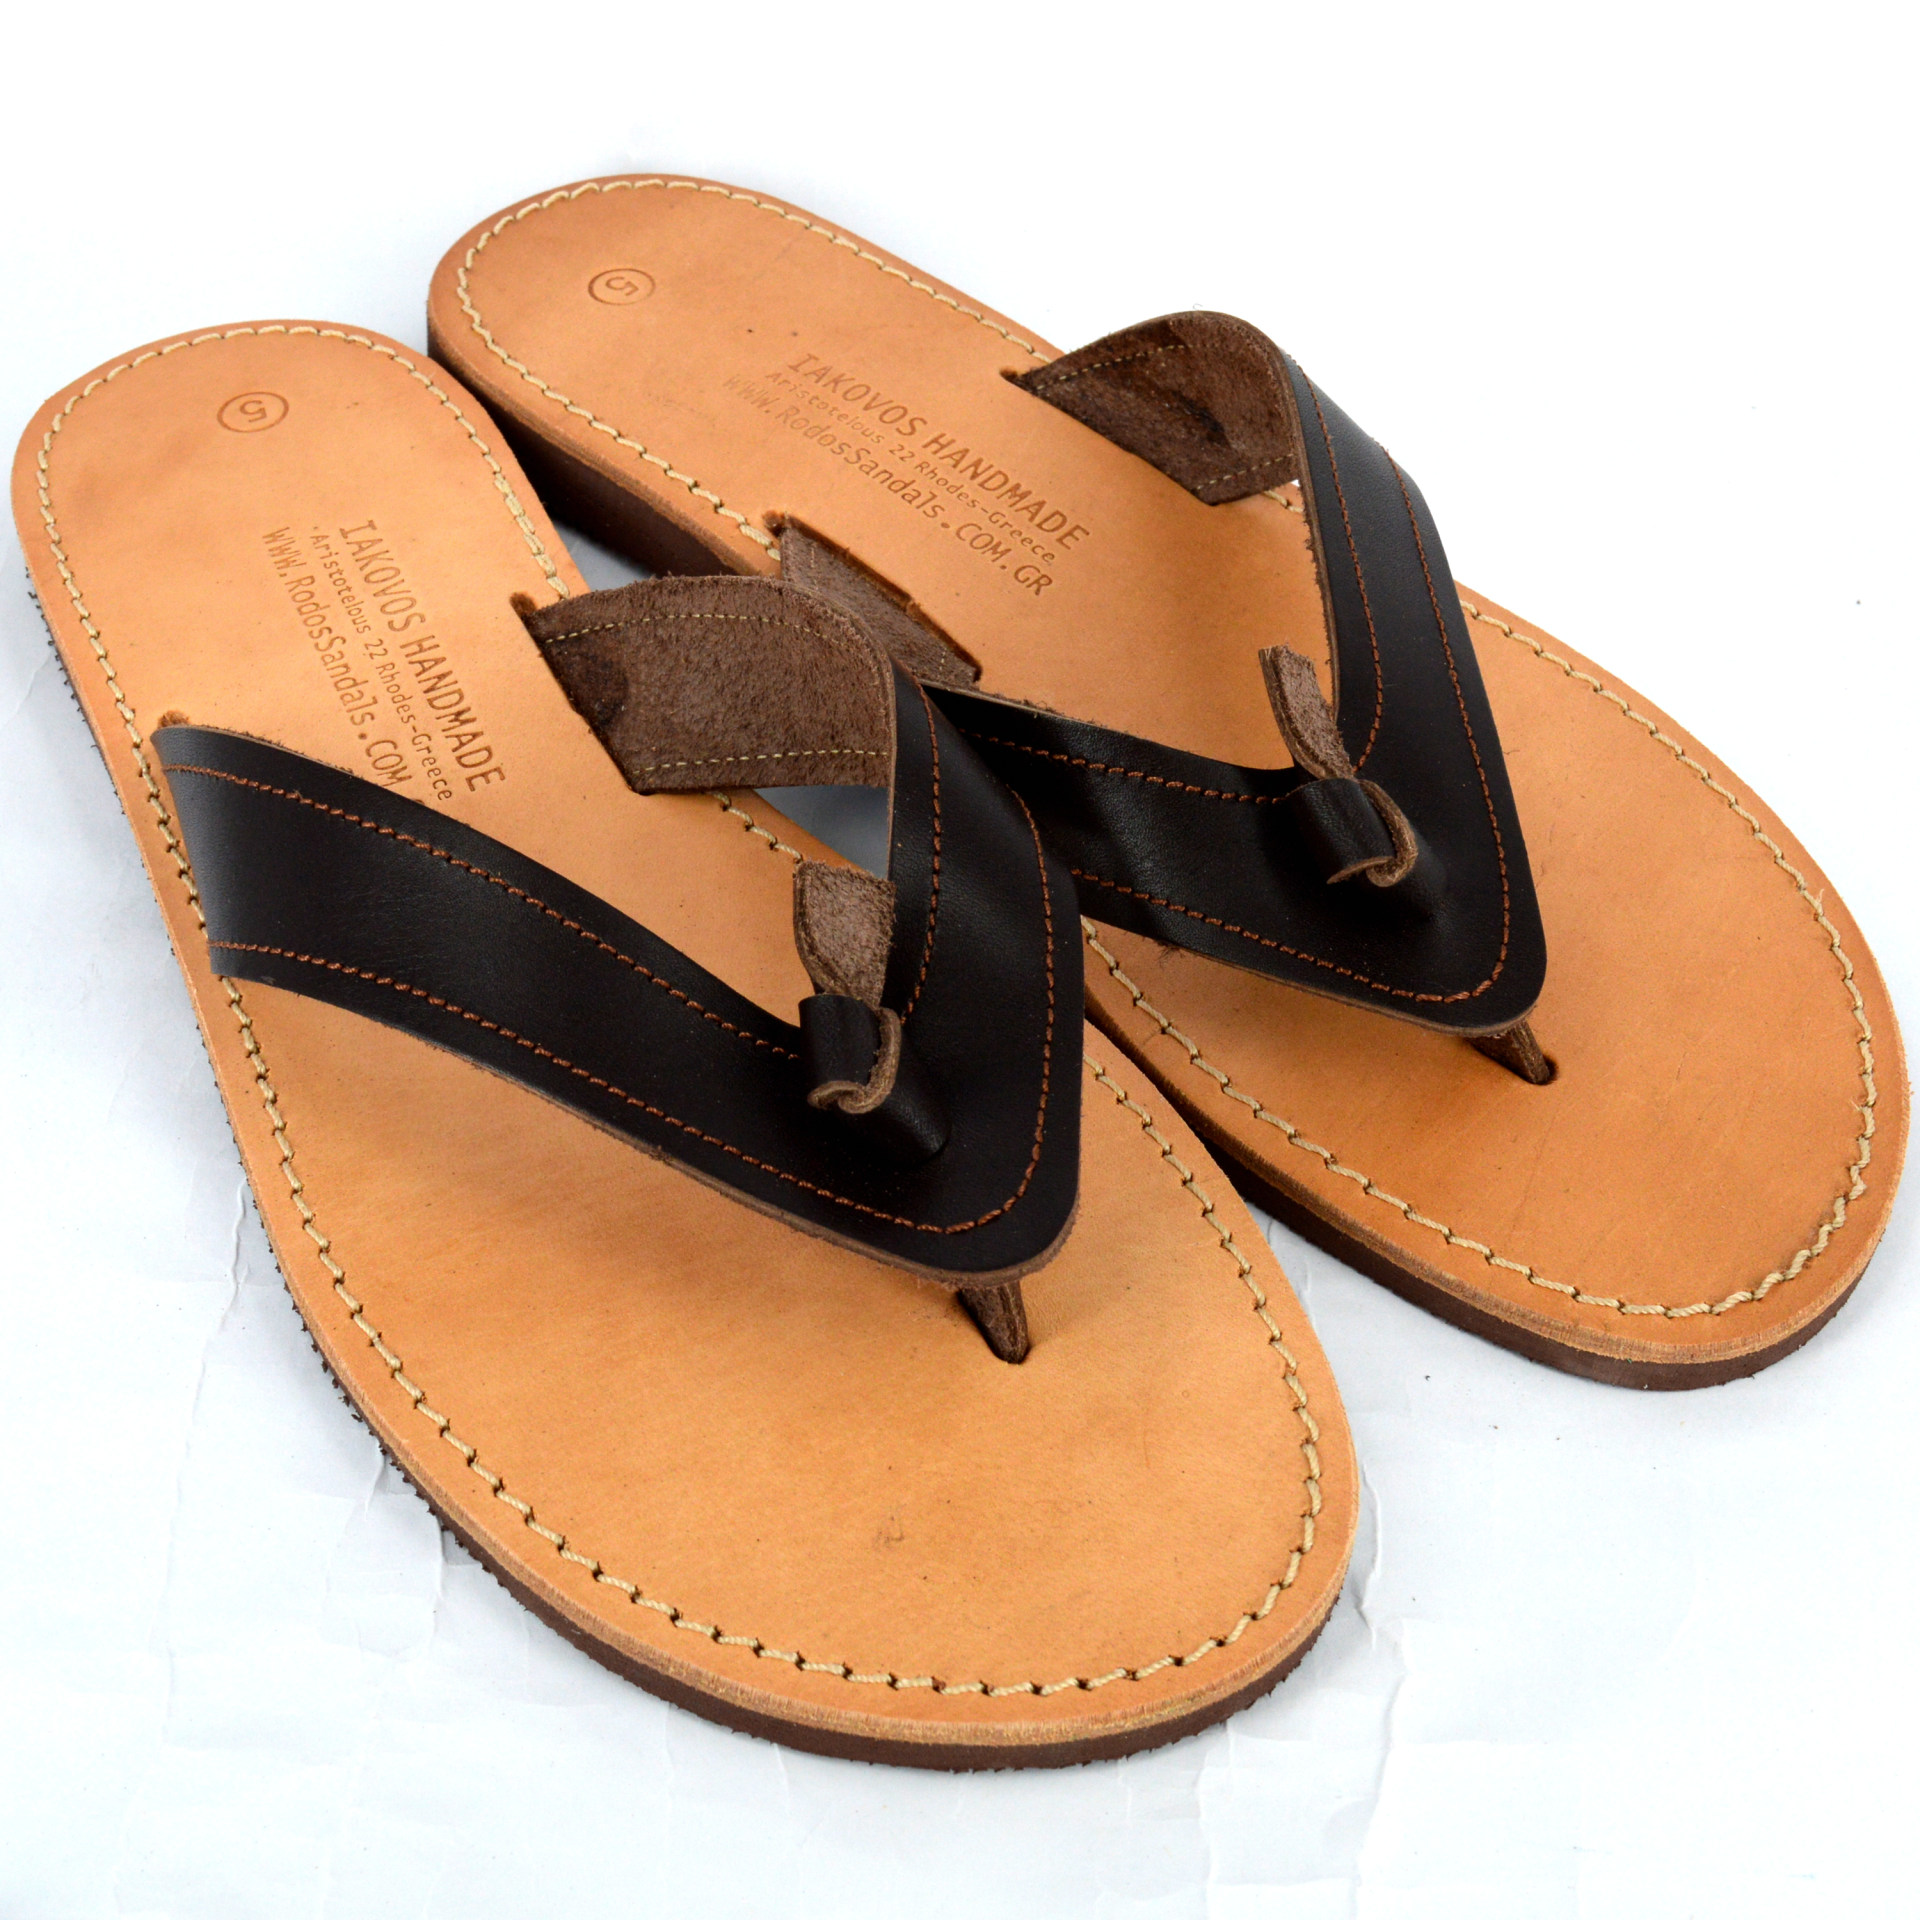 Share more than 151 hand made sandal